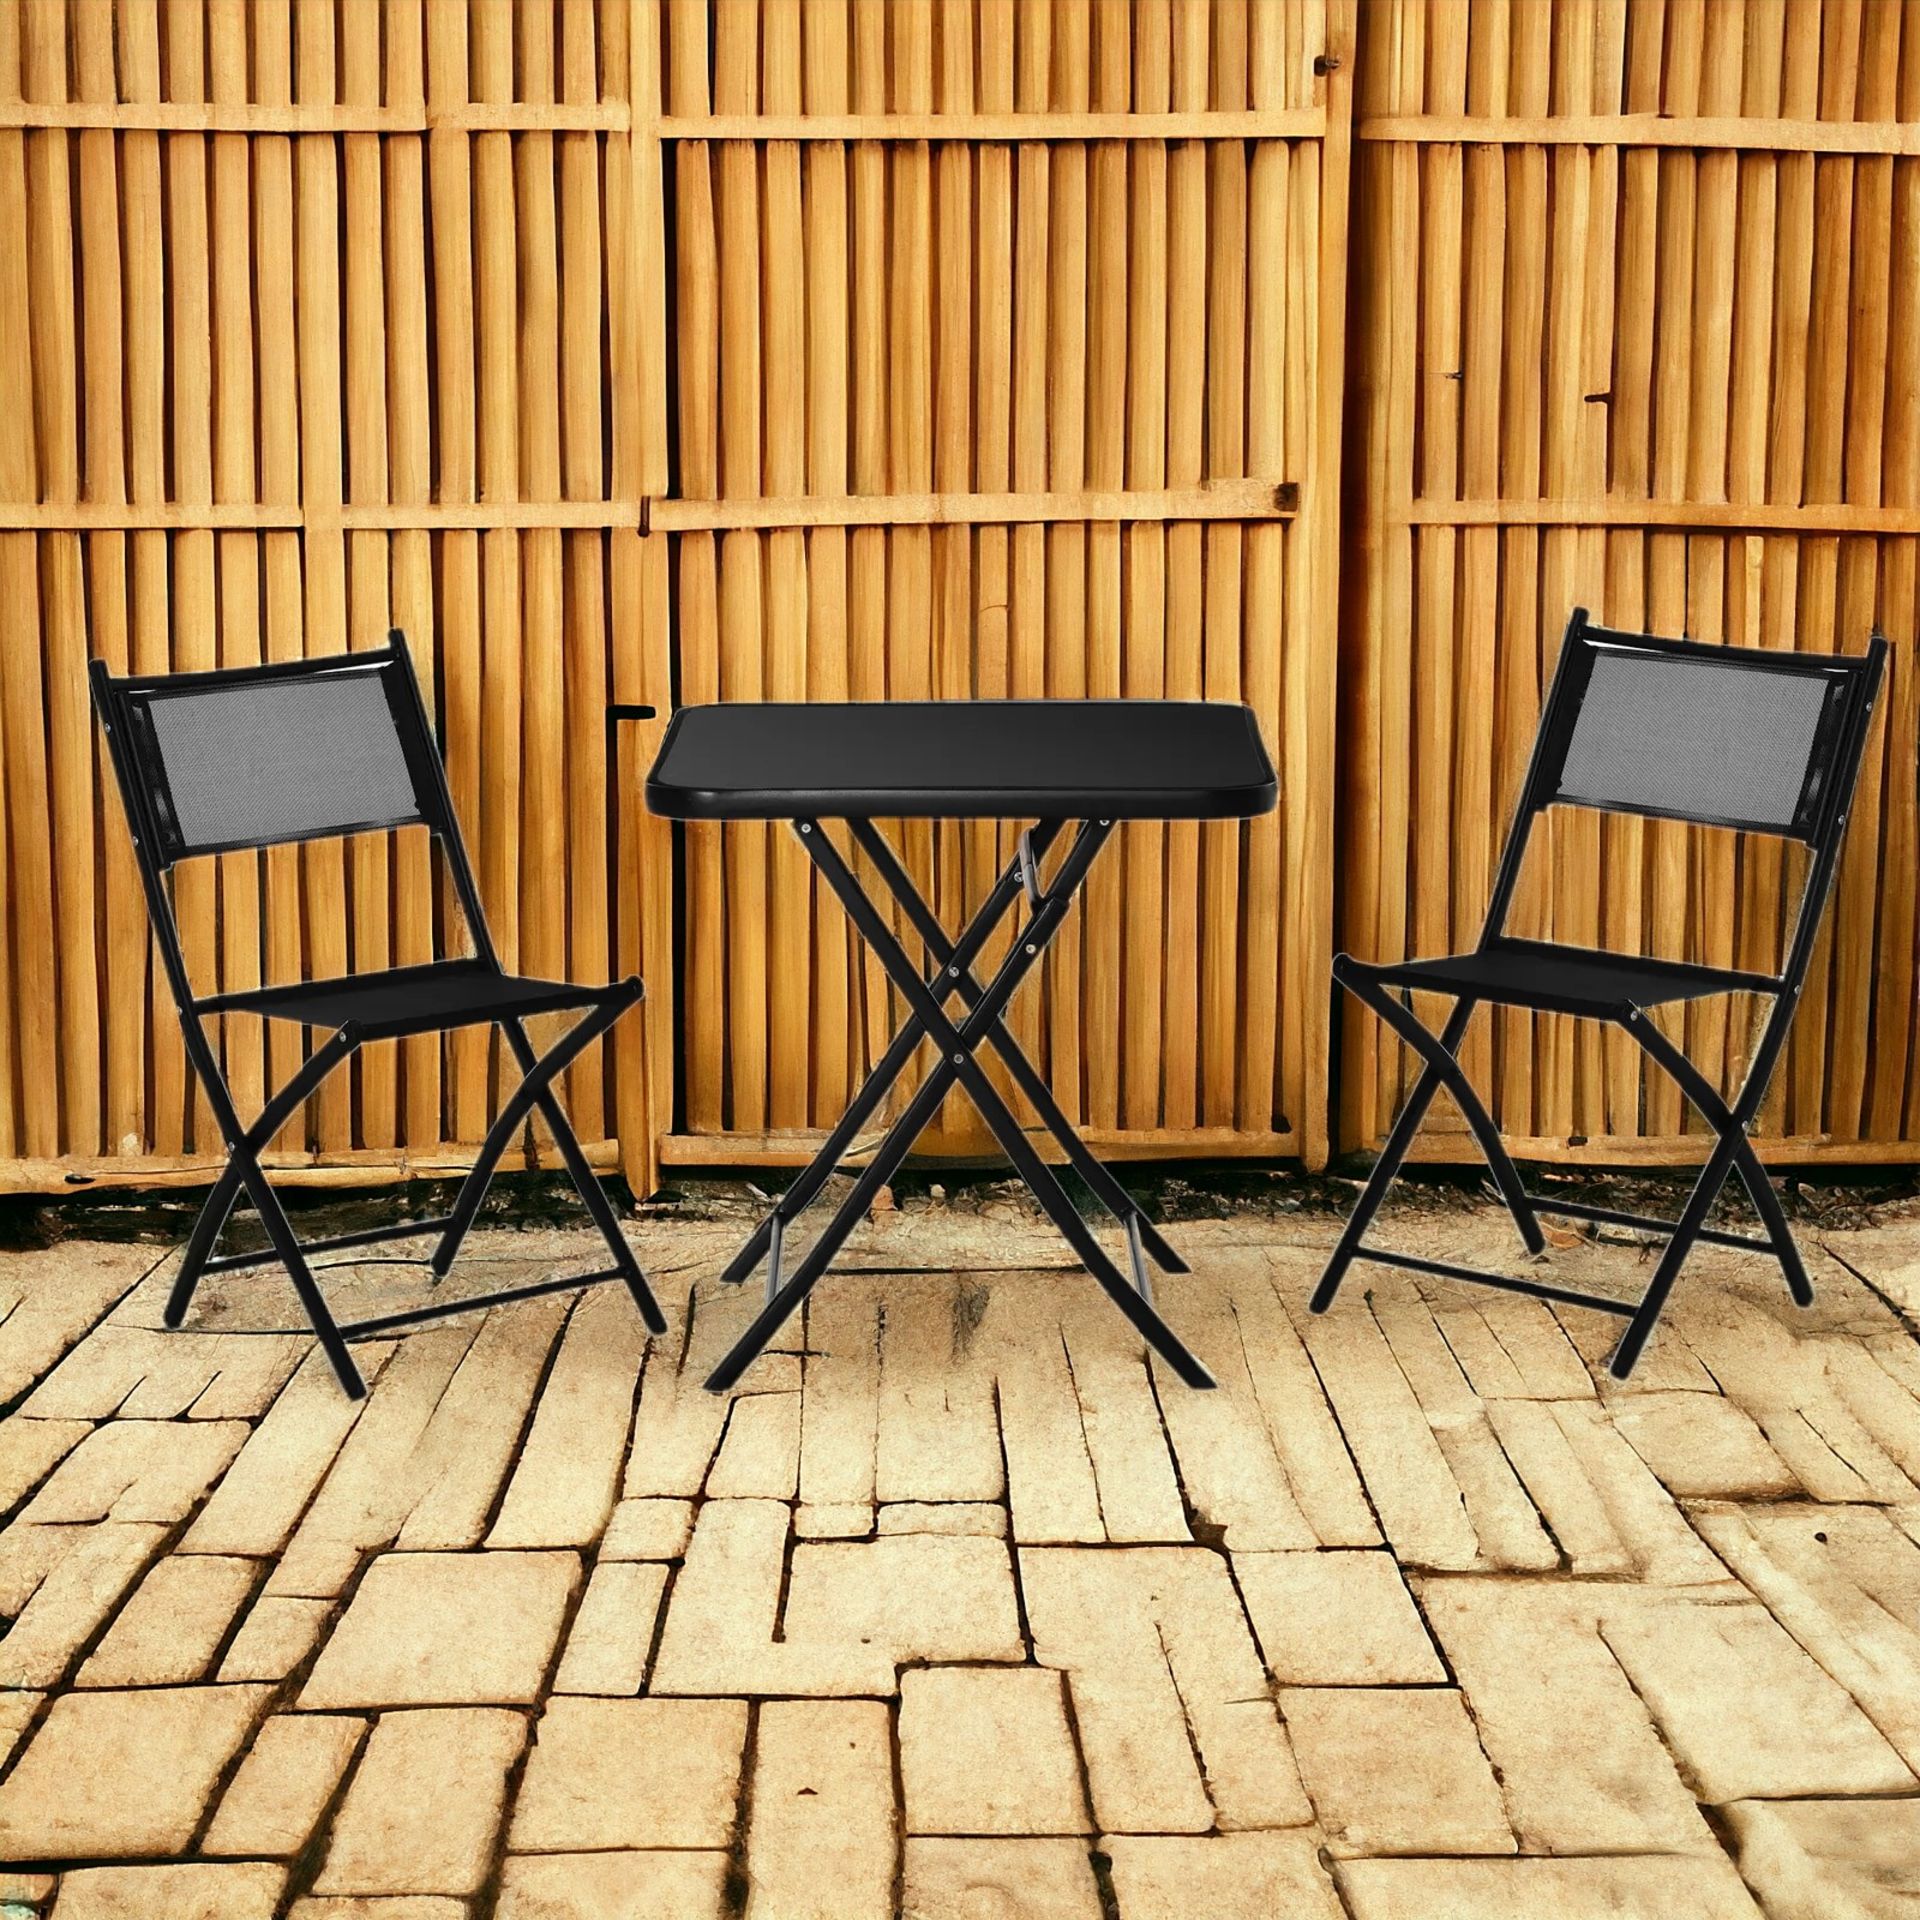 FREE DELIVERY -BRAND NEW 3PCS GARDEN BISTRO SET FOLDING TABLE AND 2 CHAIRS OUTDOOR FURNITURE - Image 2 of 2